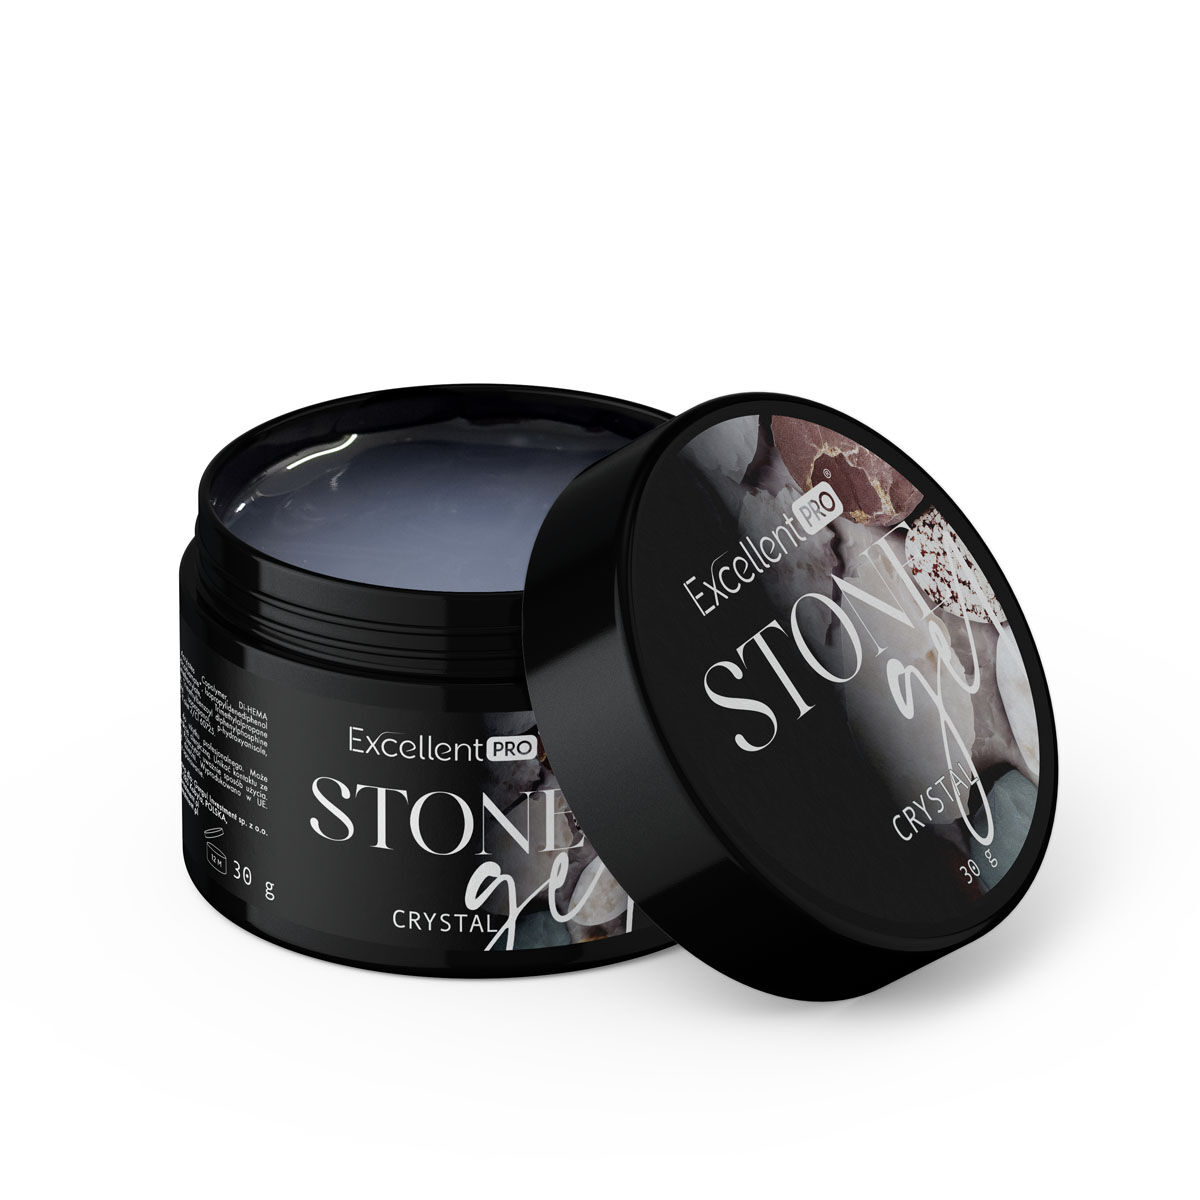 Excellent PRO Stone gel Crystal 30g